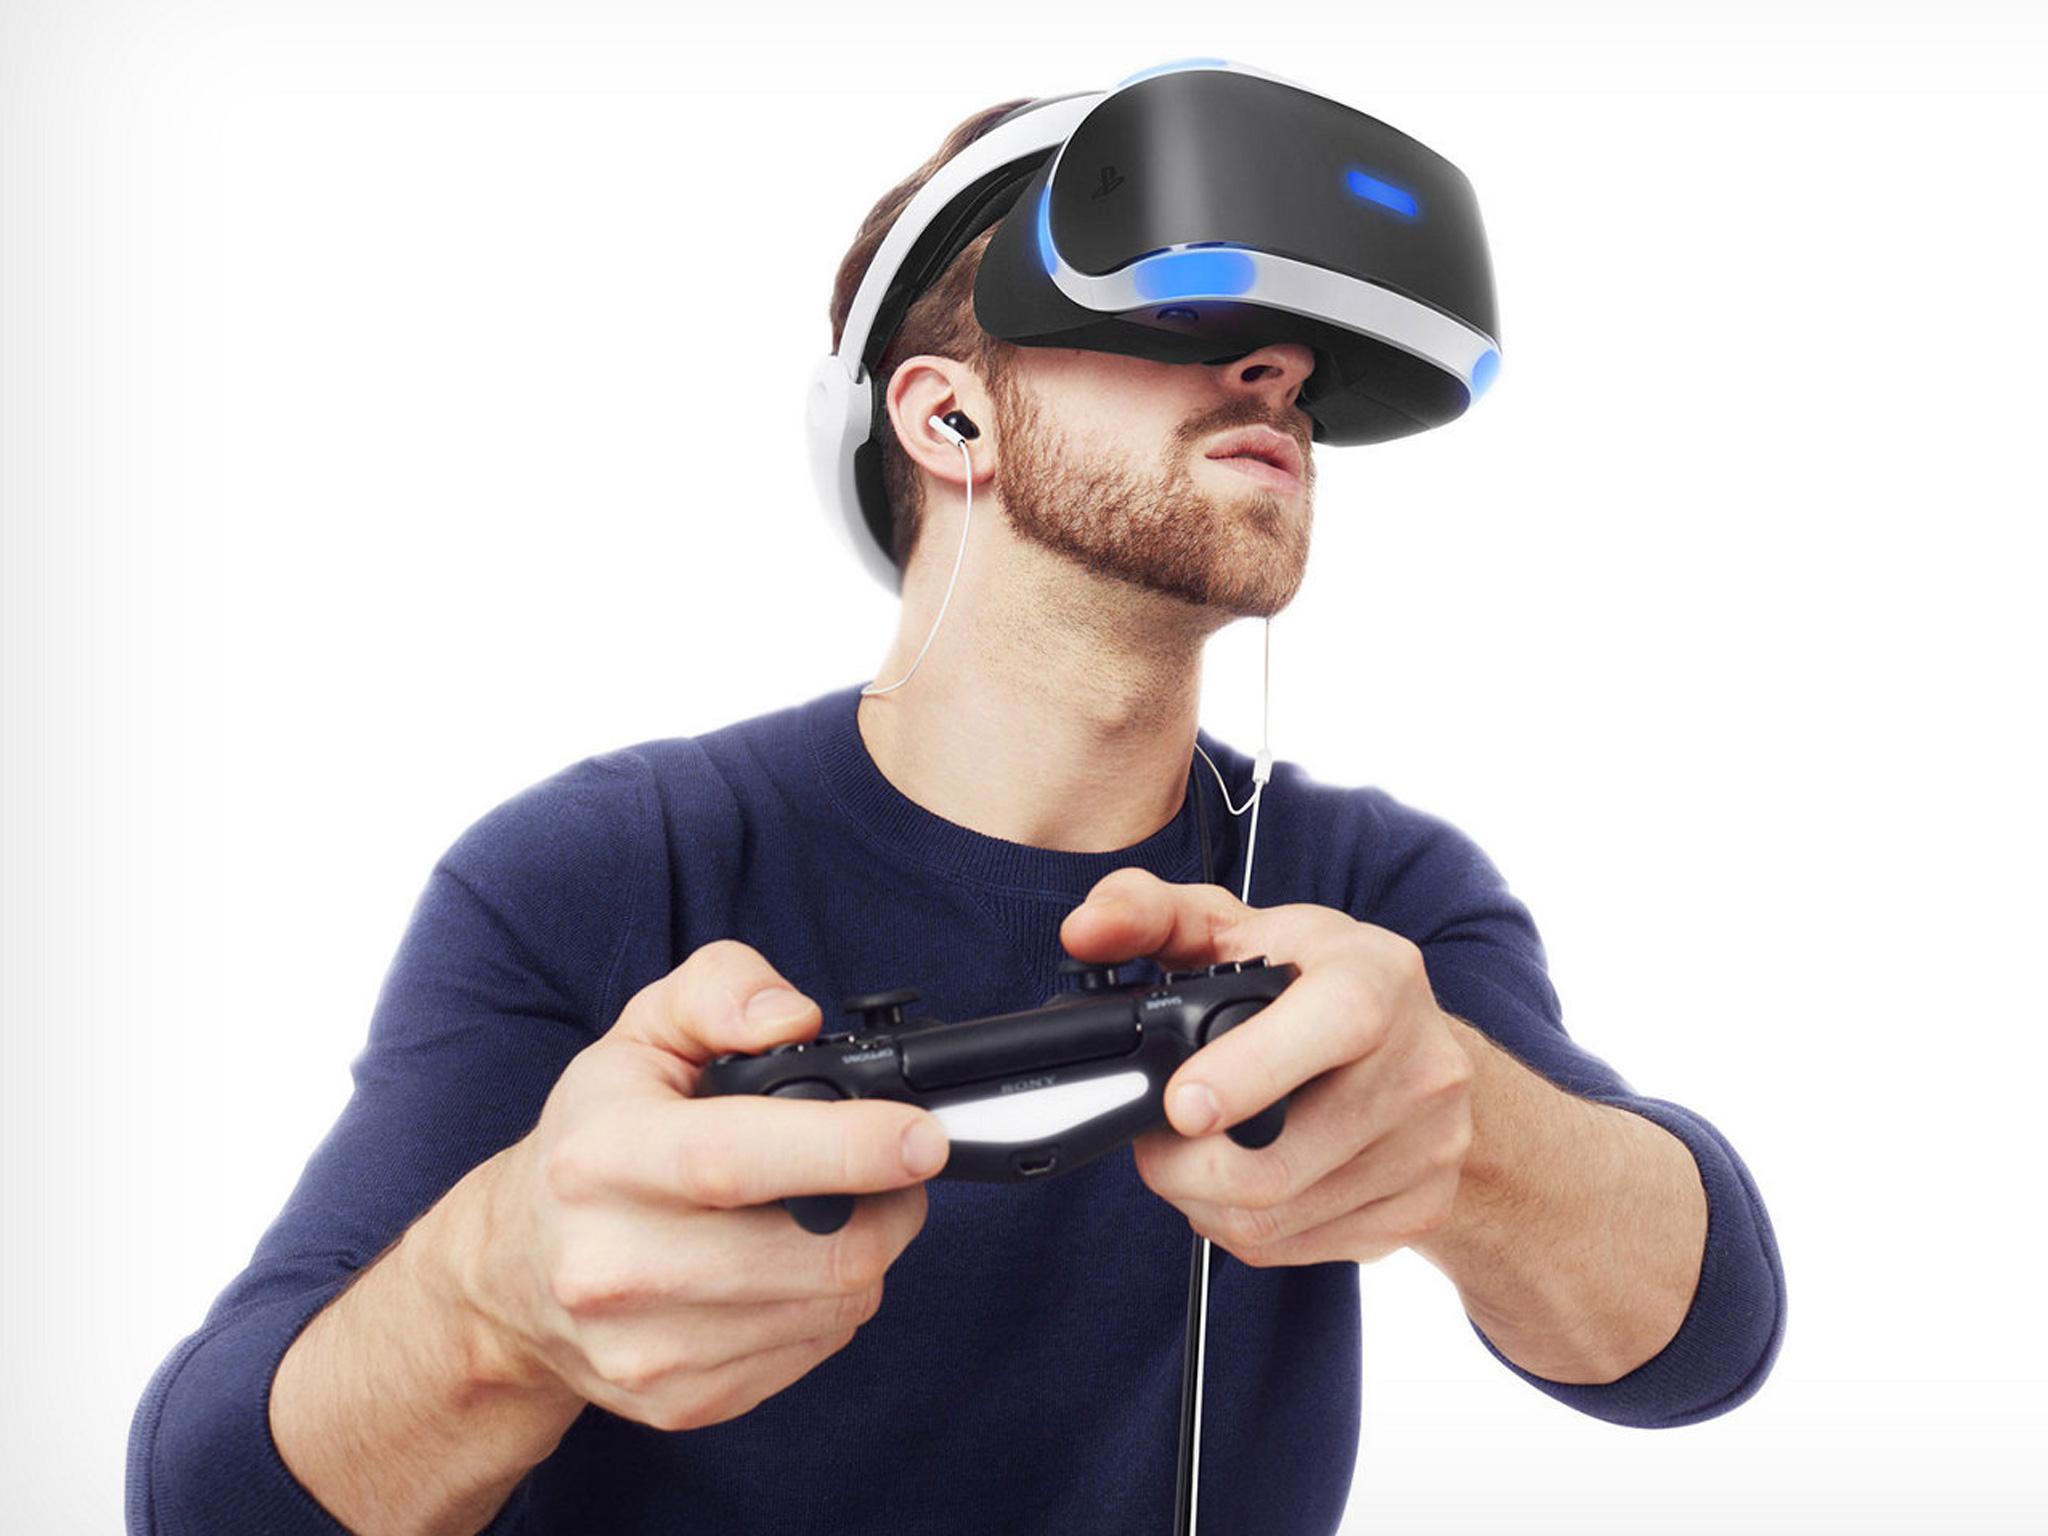 best psvr games with controller